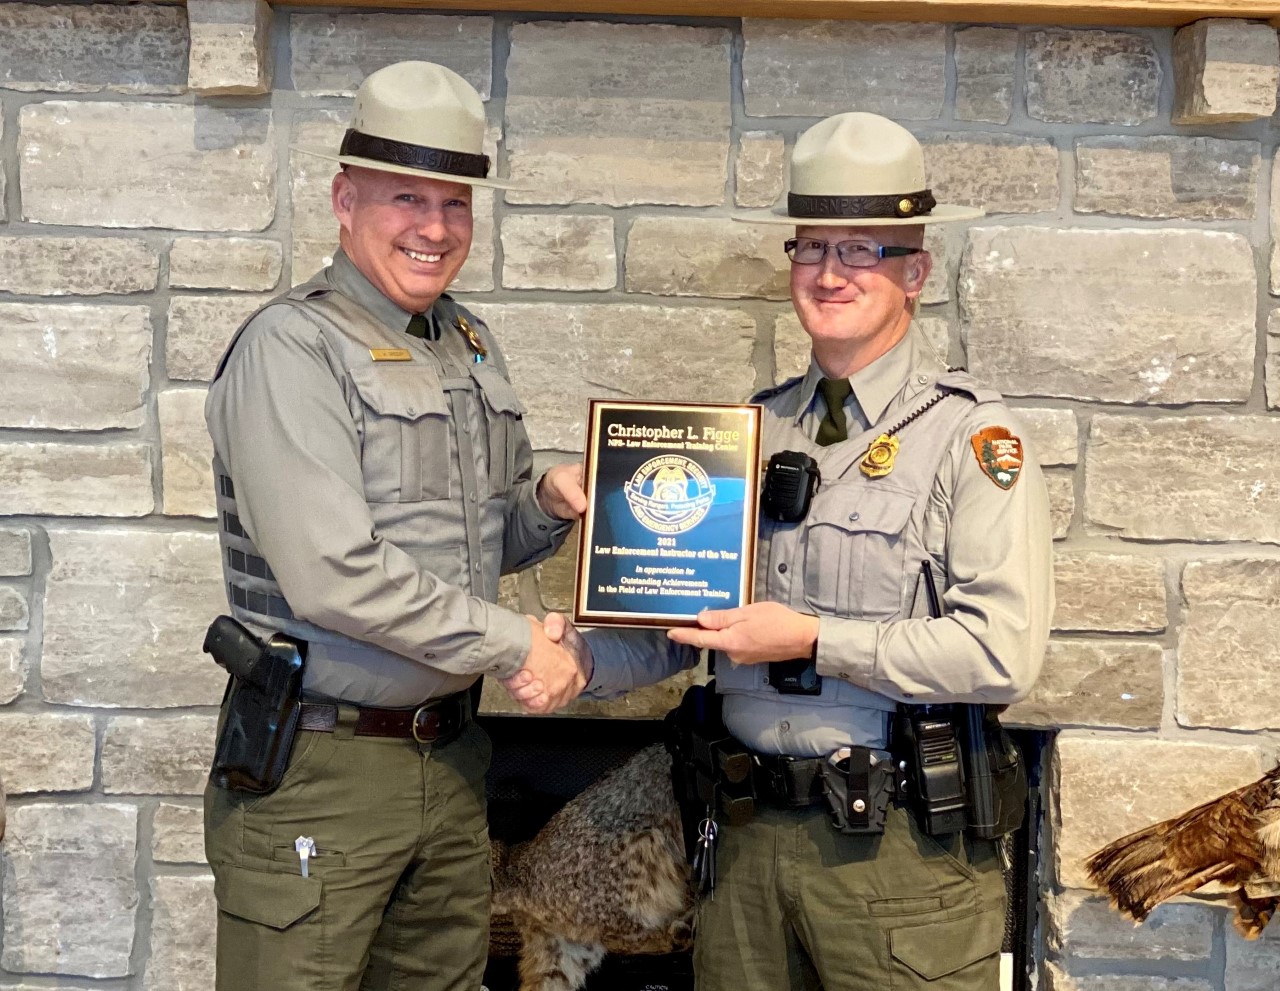 Two National Park Service law enforcement rangers in flat hats and gear standing in a lobby holding an award plaque between them.